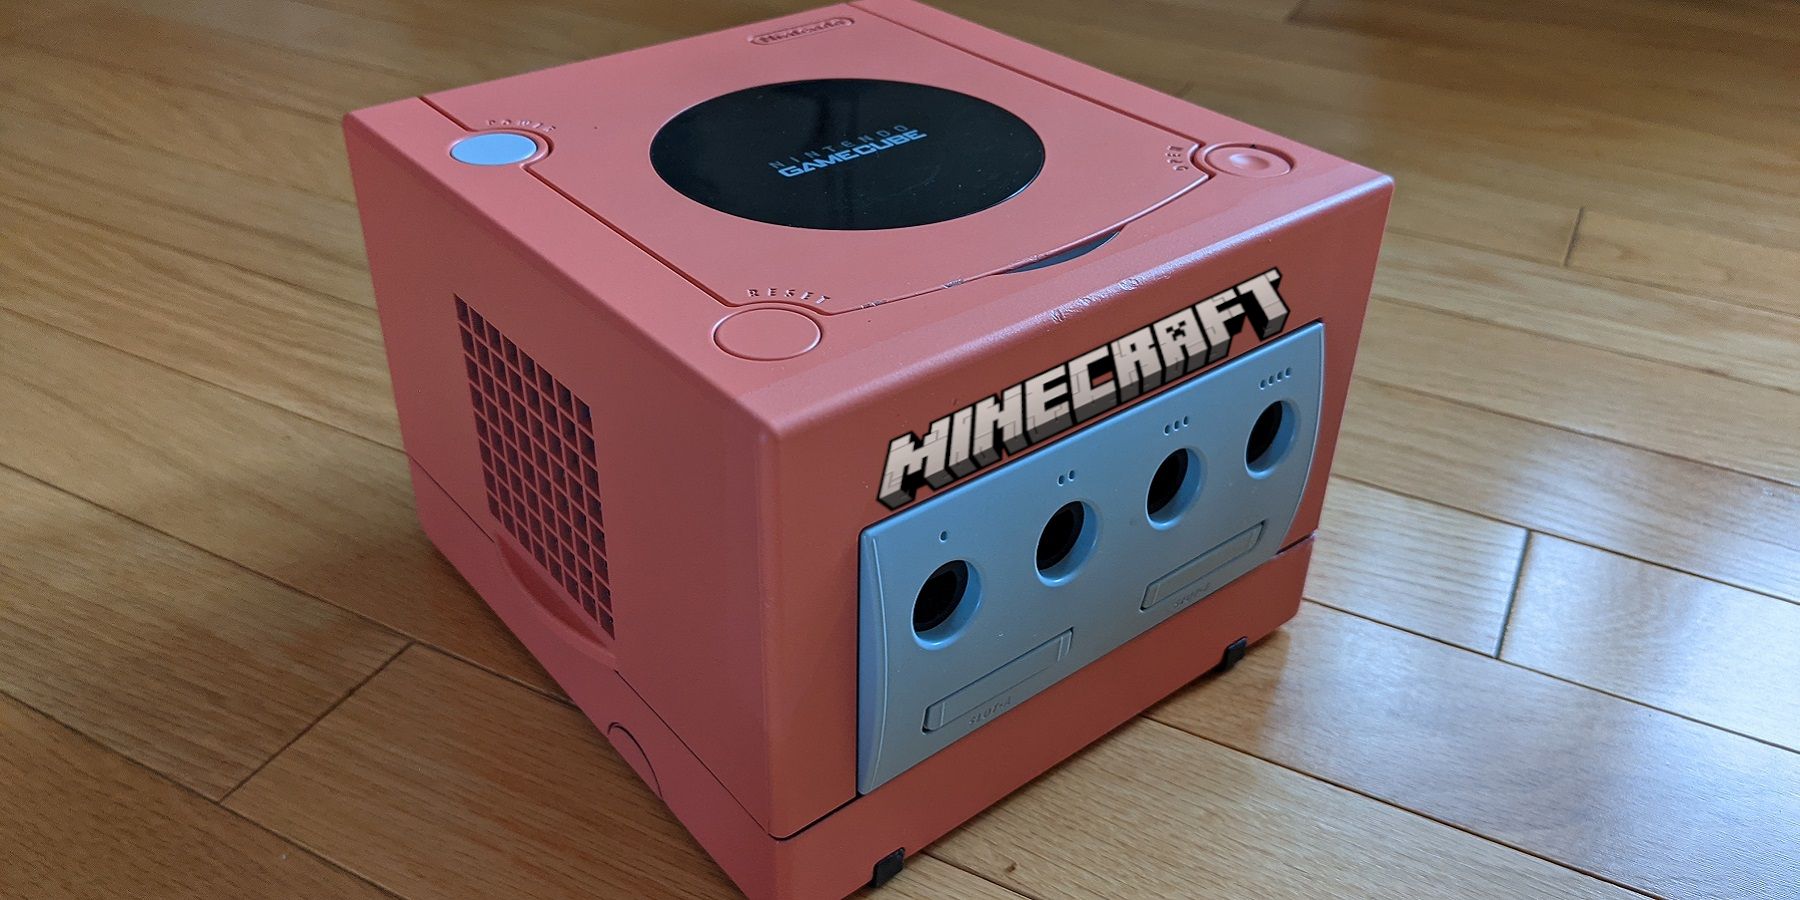 Photo of a salmon-colored Nintendo GameCube with the Minecraft logo on the front.